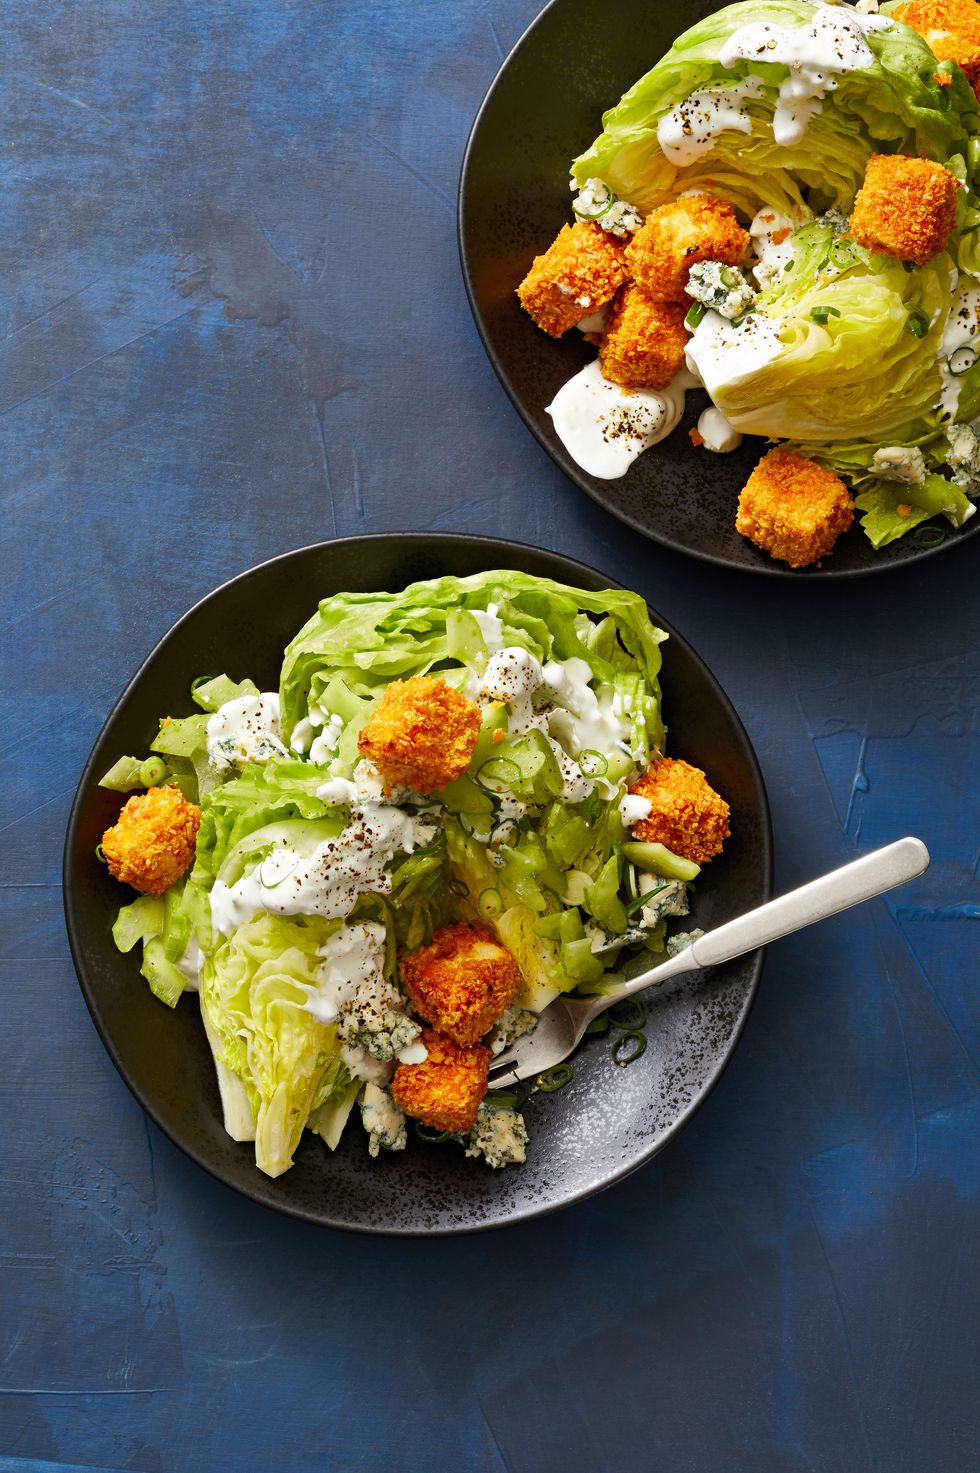 50 lunch recipes for when you can't handle another salad